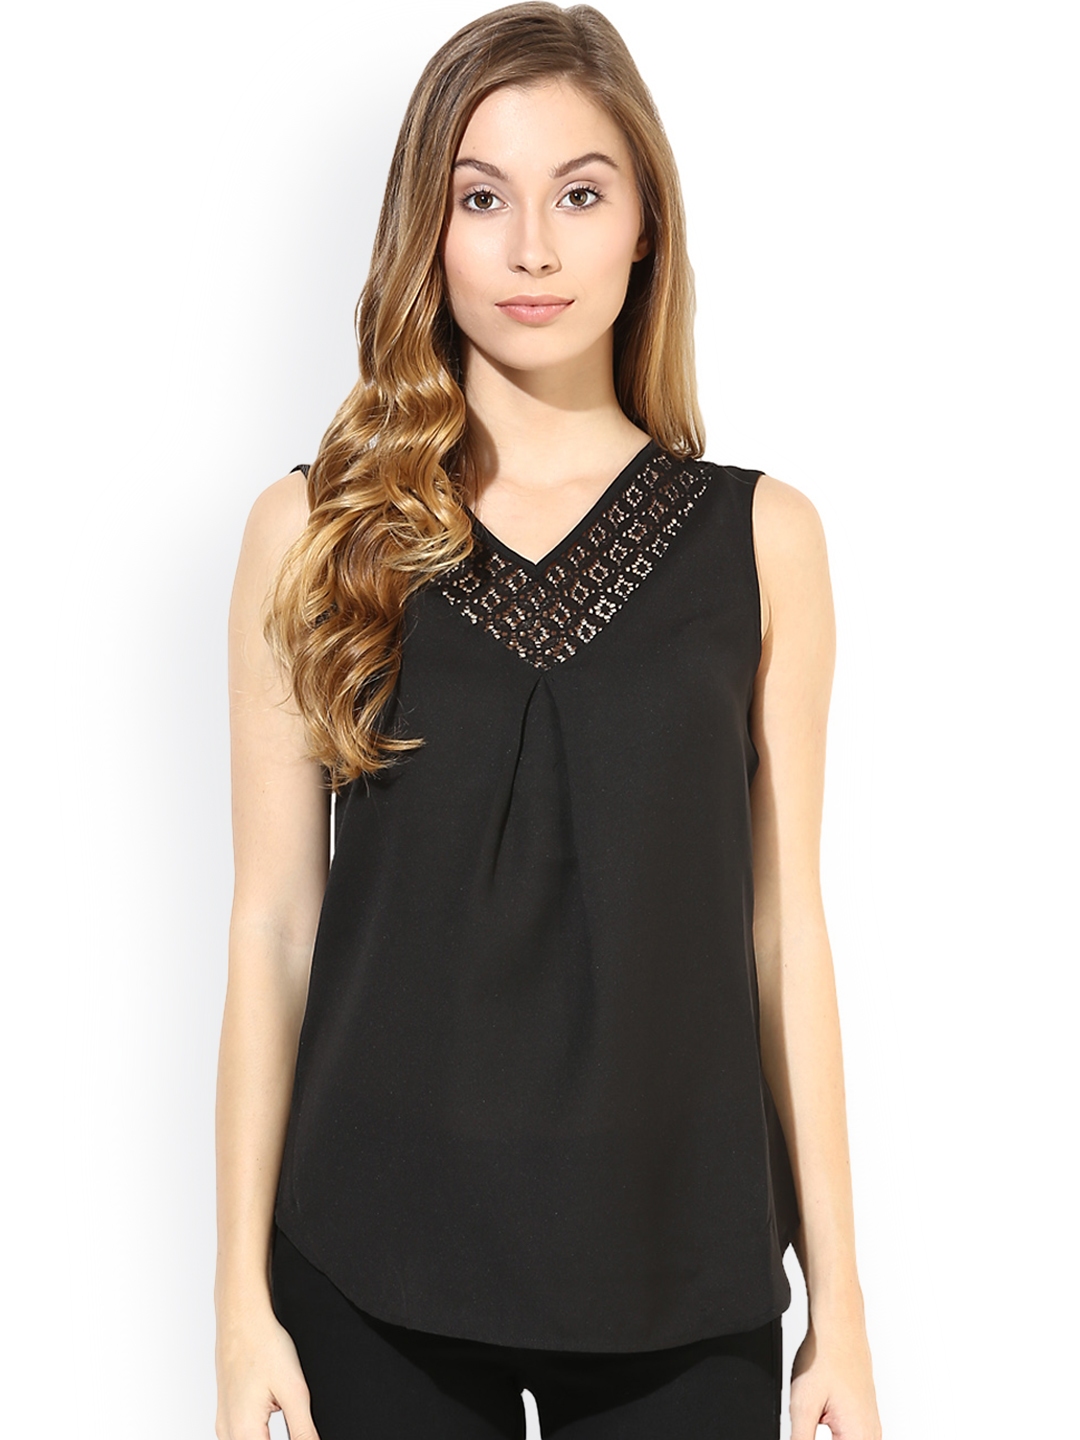 Buy The Vanca Black Top With Lace Detail - Tops for Women 965009 | Myntra